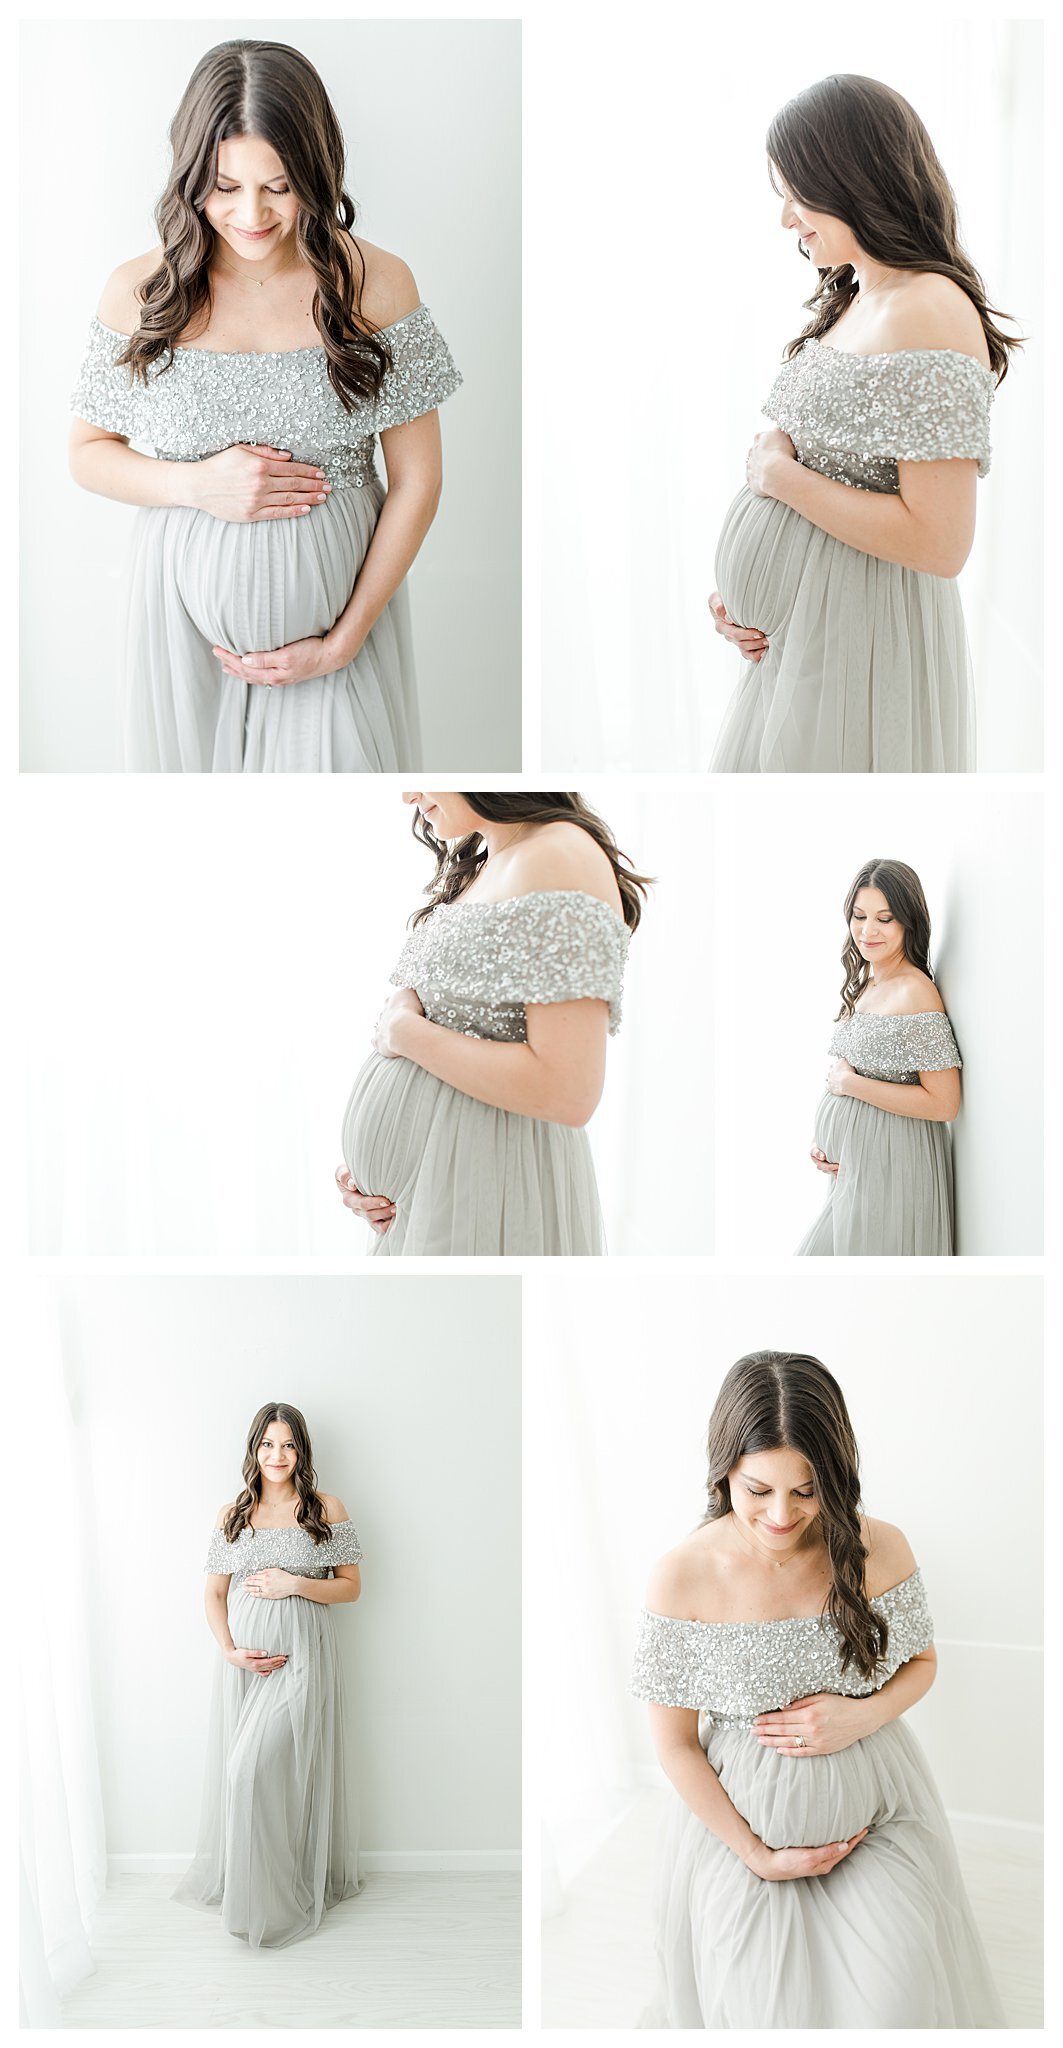 Fairfield County Connecticut Maternity Photographer - studio maternity session with Pregnant Mom in gray formal dress